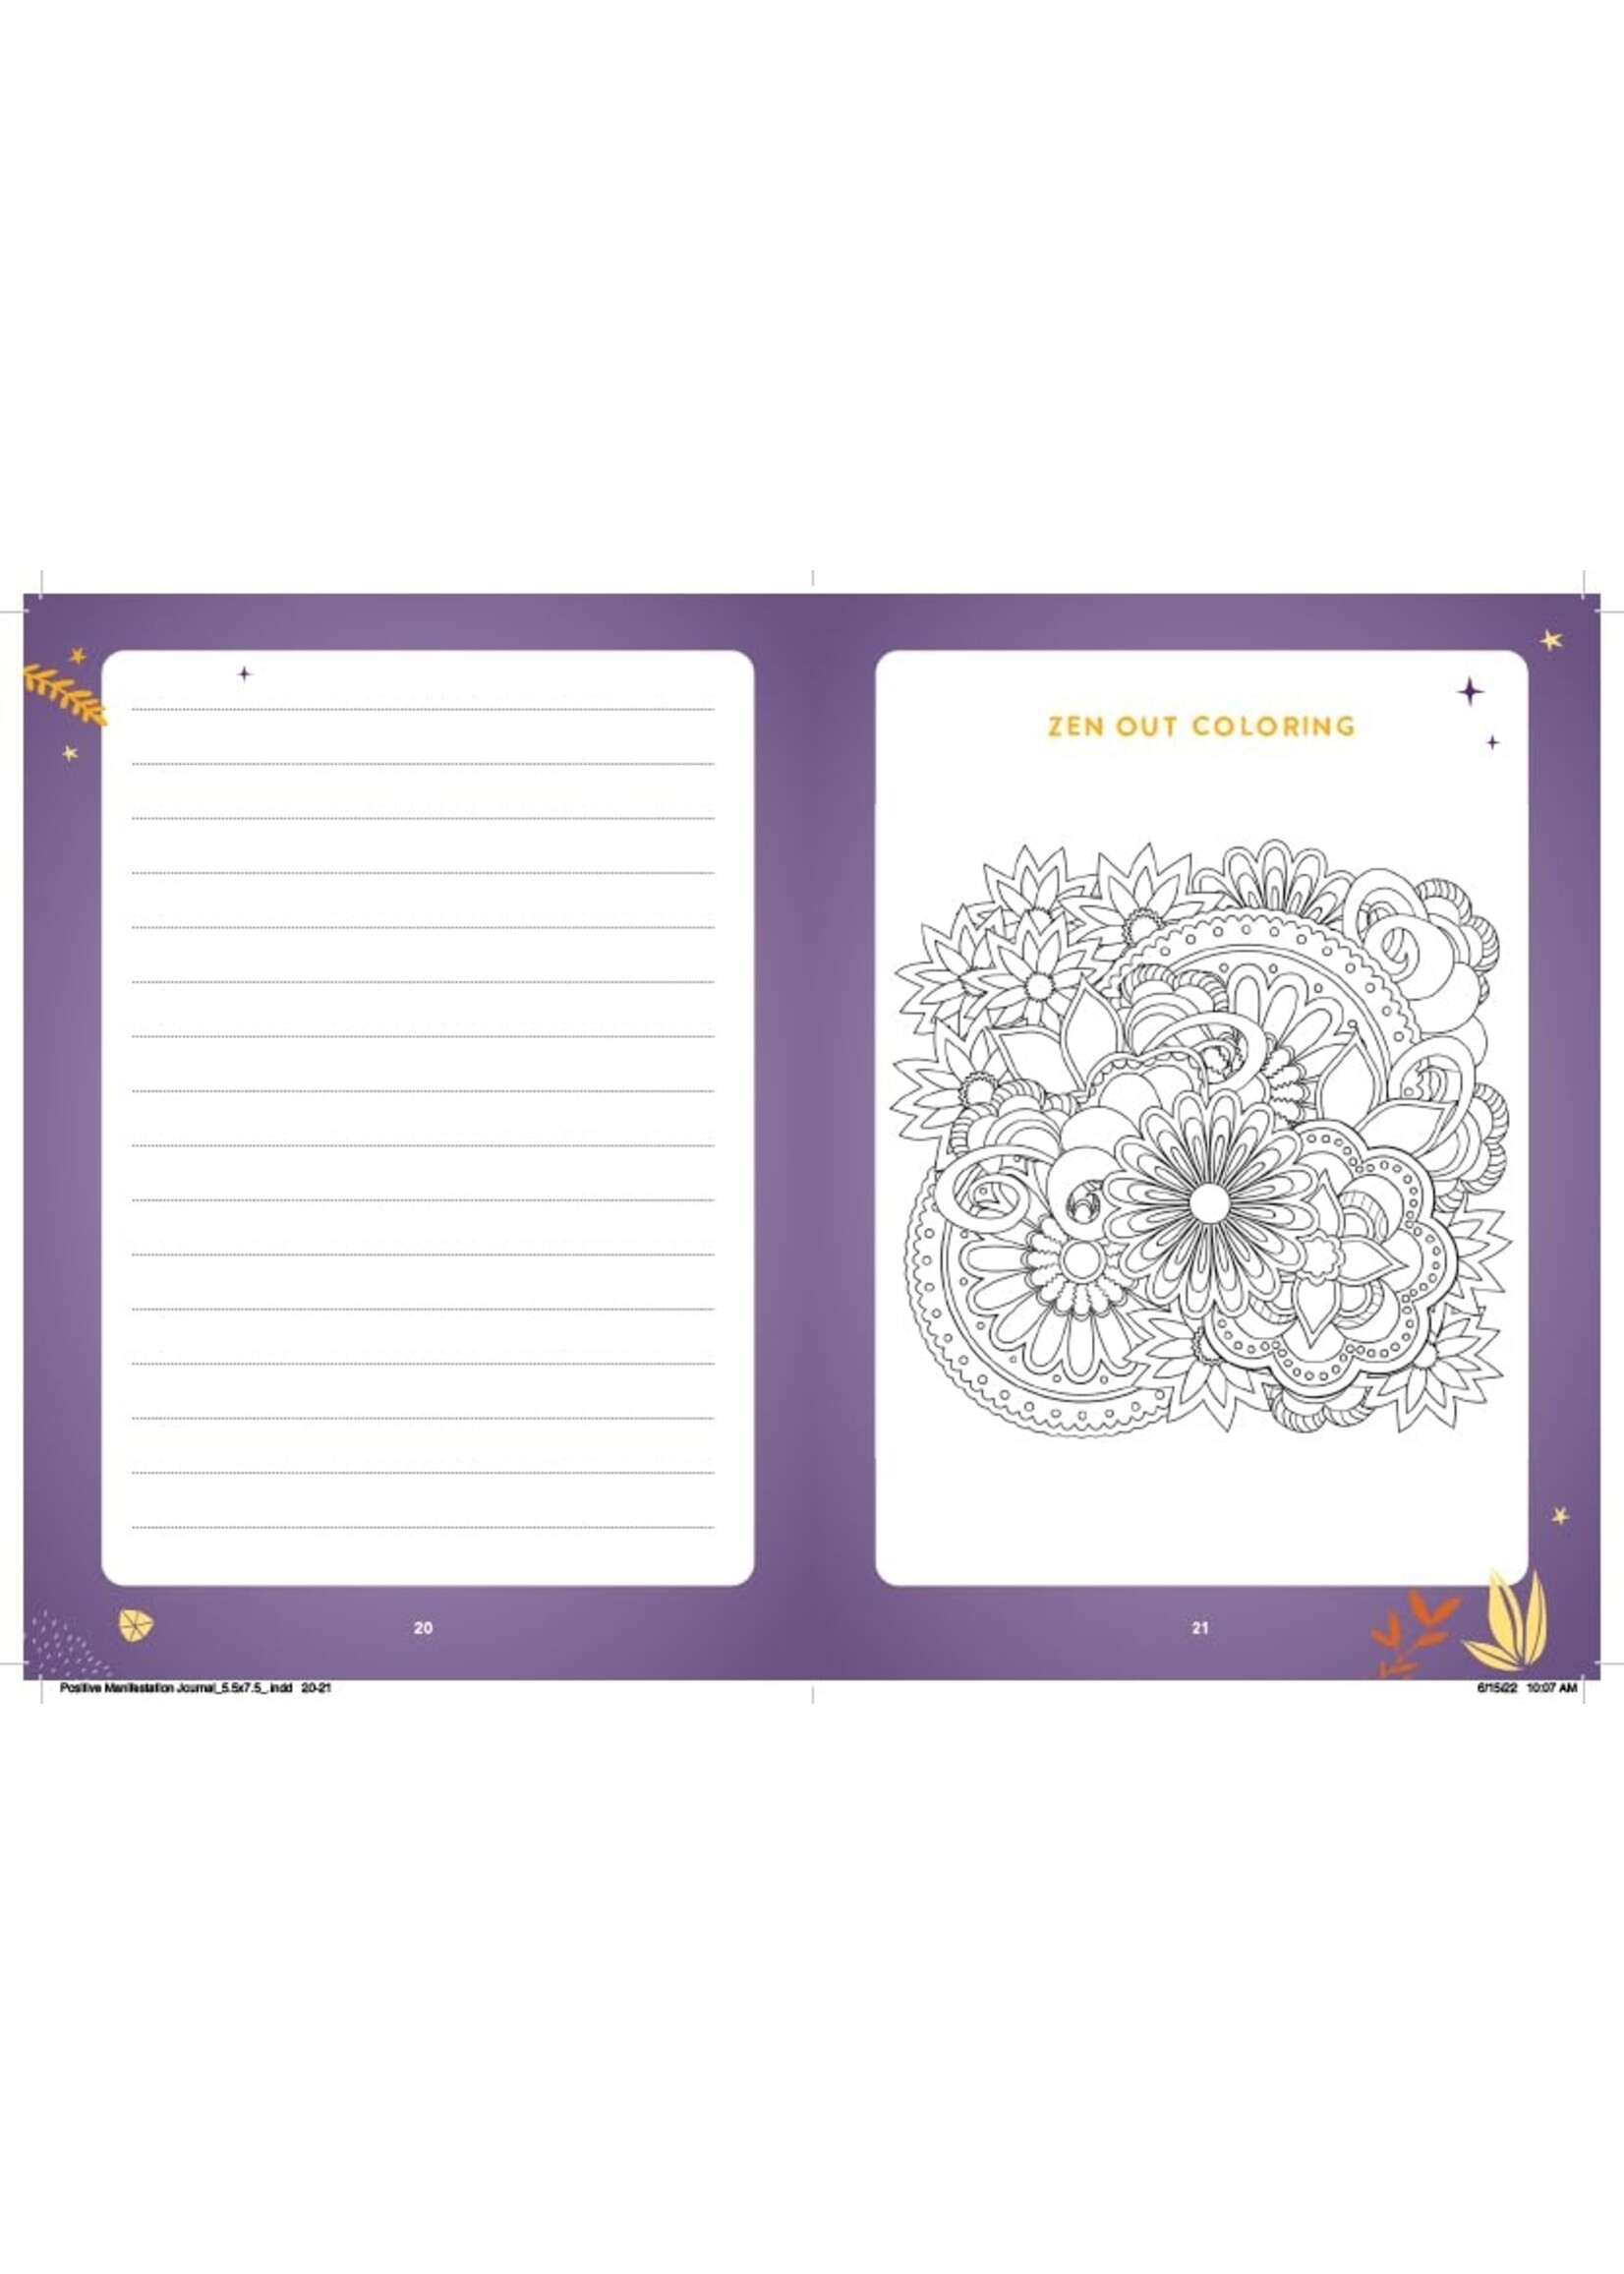 Positive Manifestation Journal - Inspirational Prompts & Exercises for Creating the Life of Your Dreams